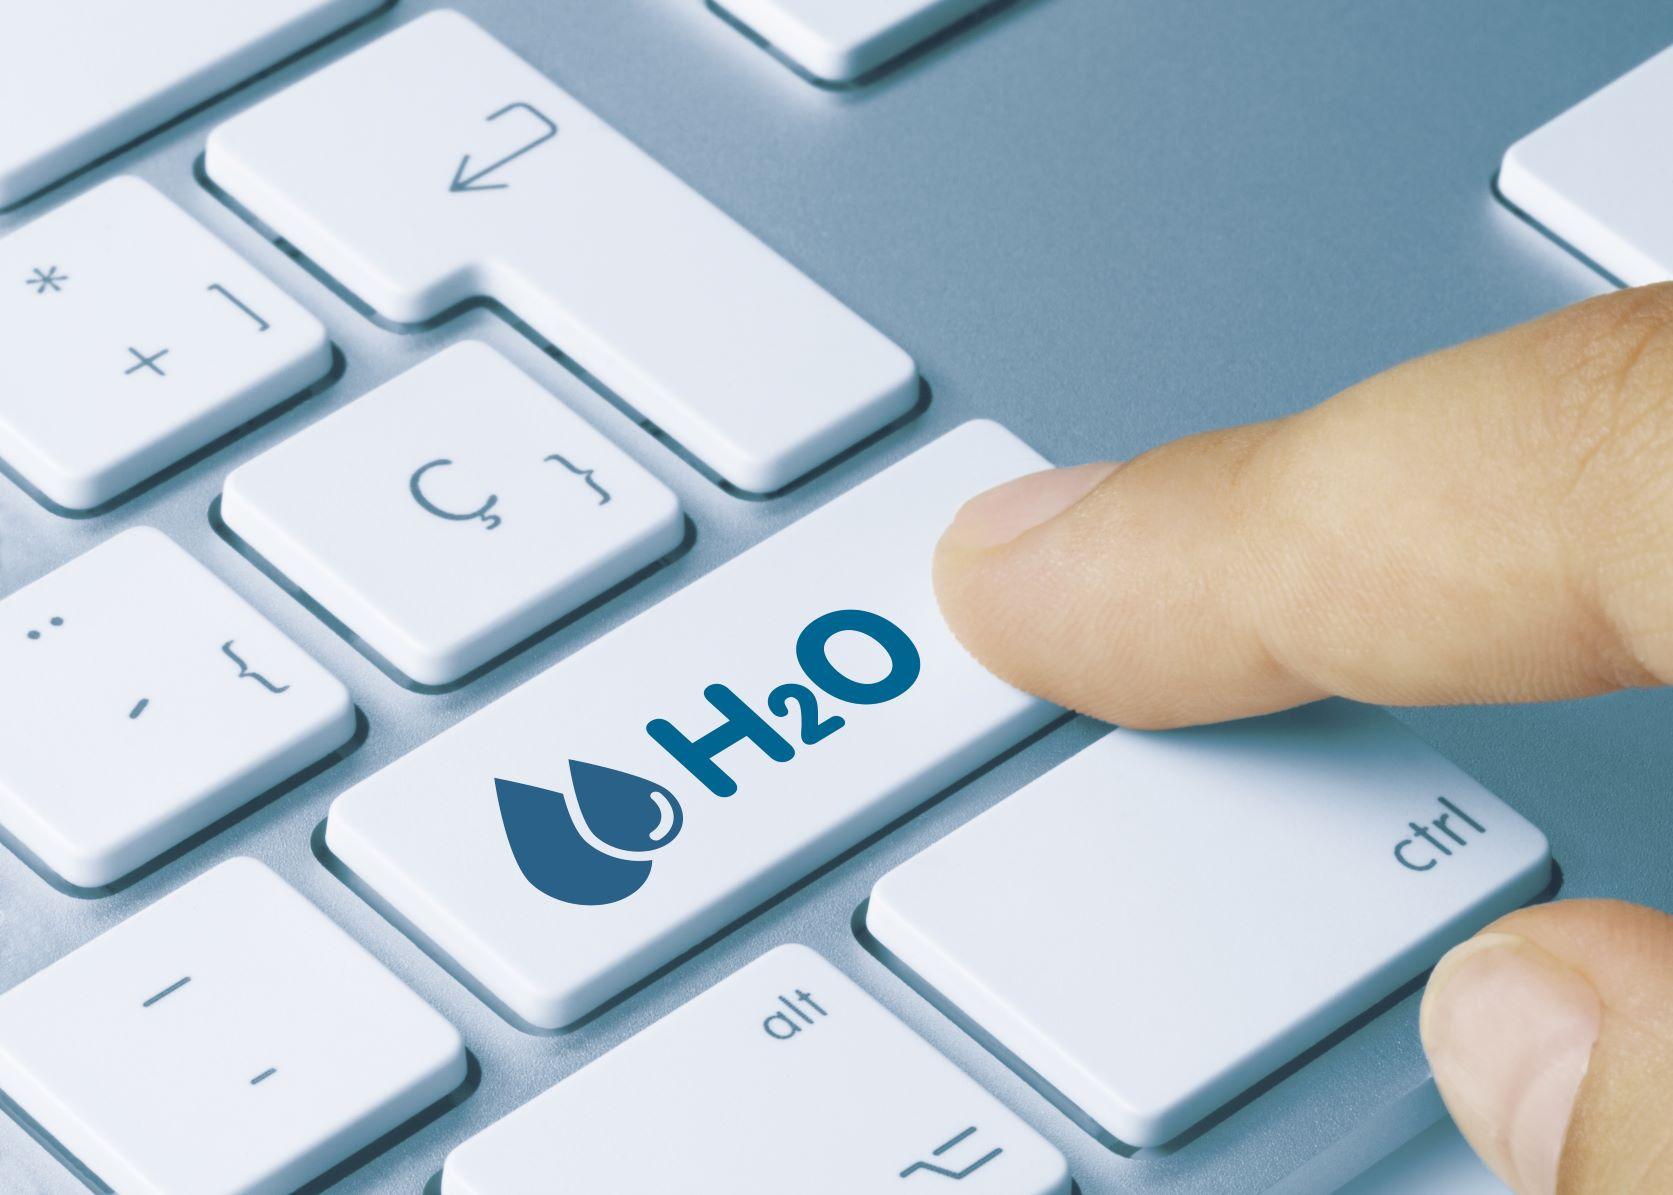 A finger over a keyboard, reaching for a key labeled H2O with a water symbol